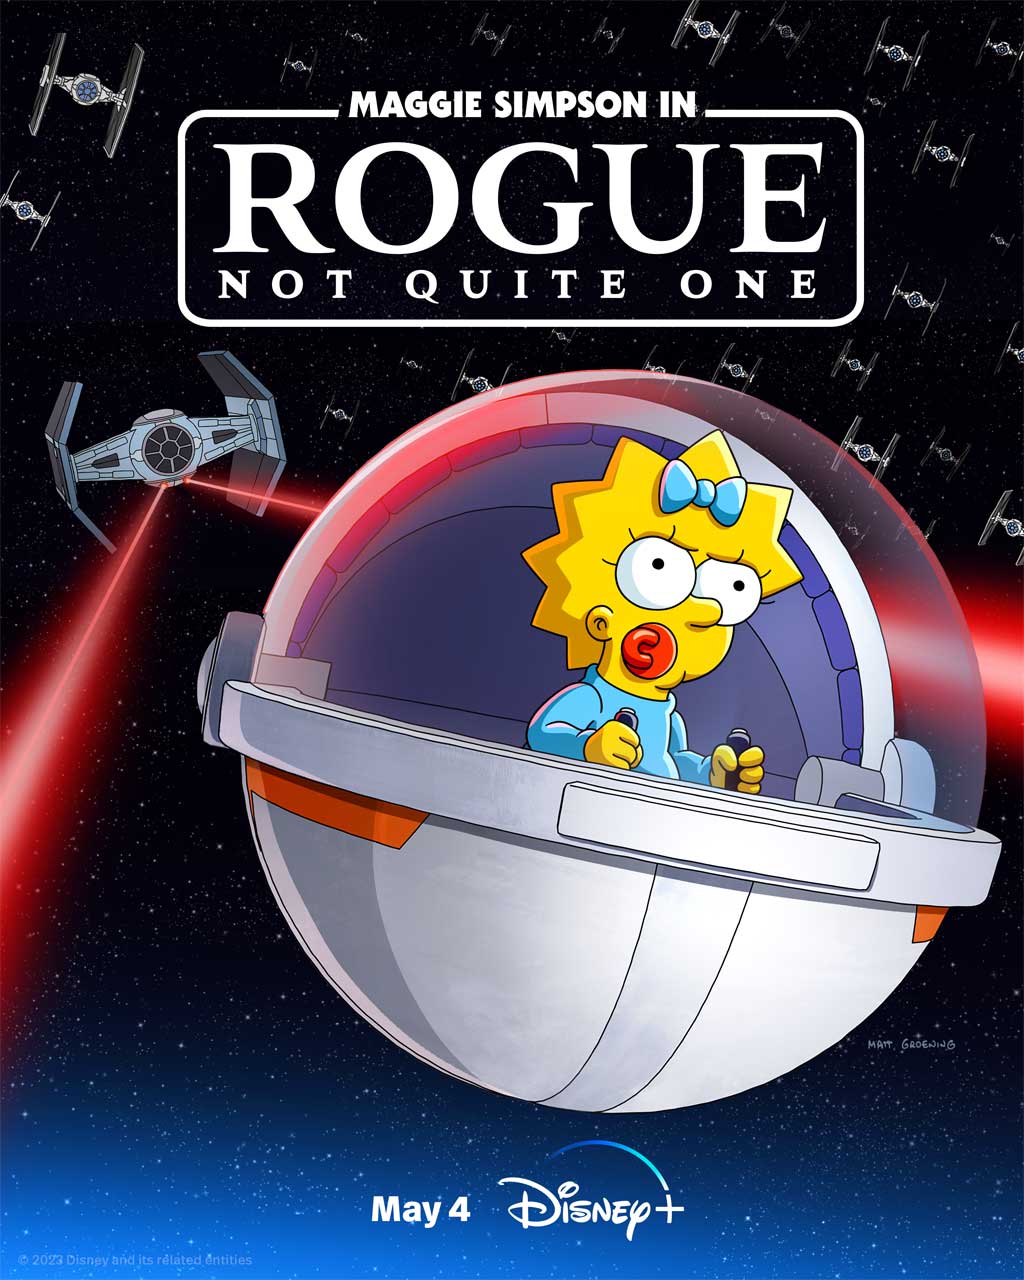 Maggie Simpson in ‘Rogue Not Quite One